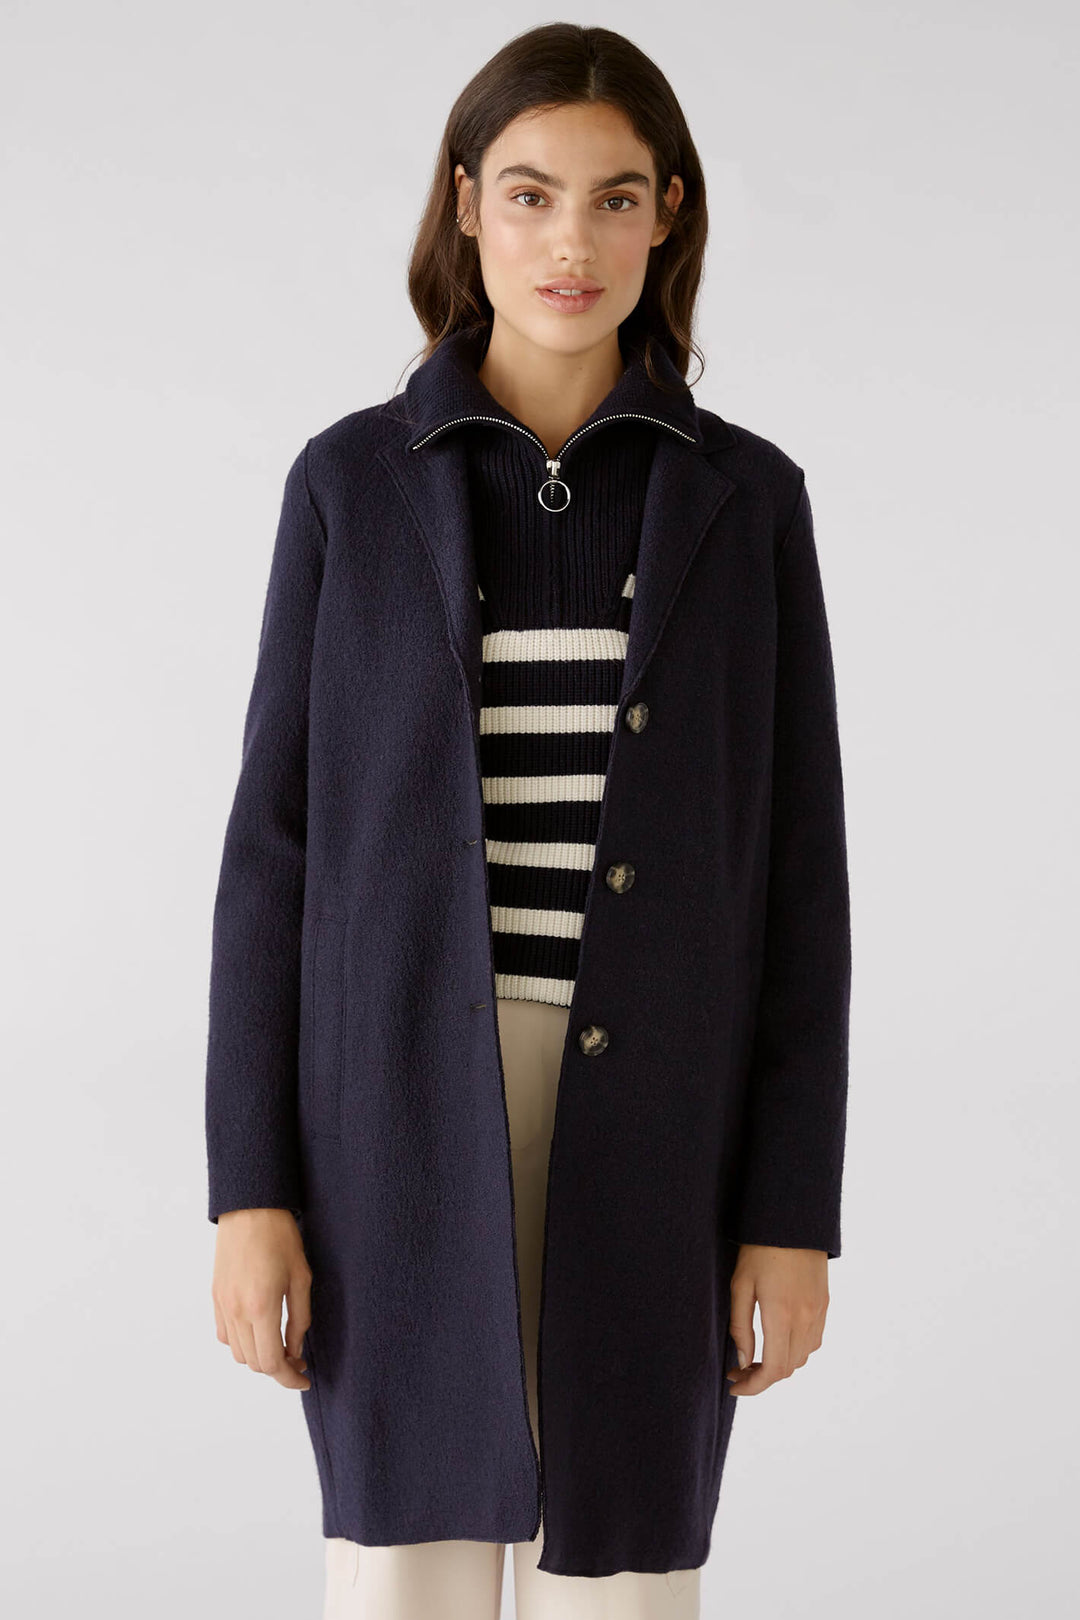 Oui 79918 5742 Mayson Dark Blue Button Front Boiled Wool Coat - Shirley Allum Boutique